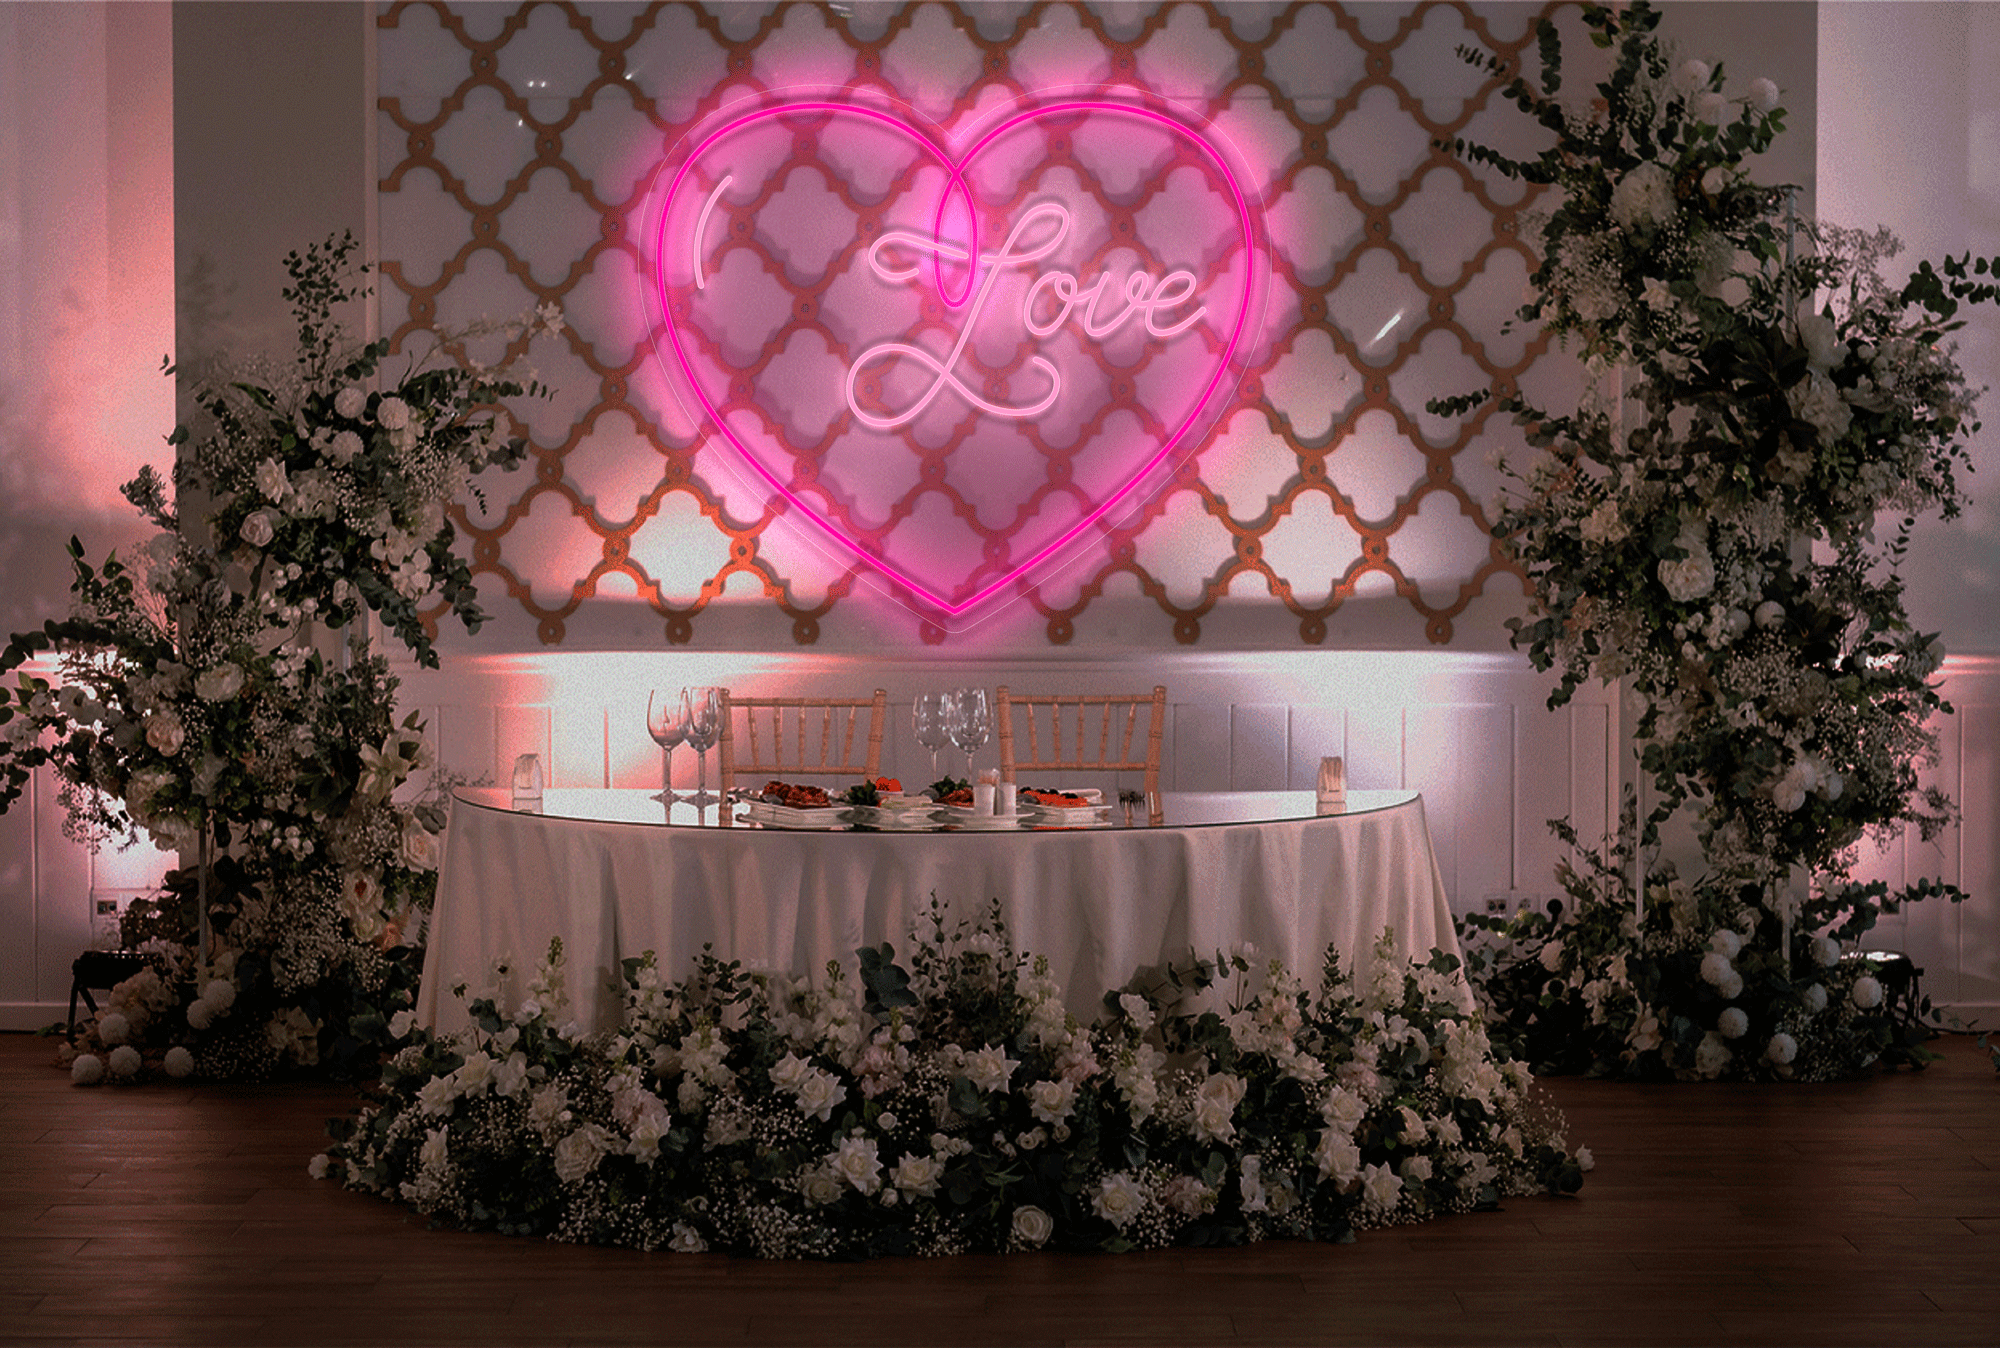 "Love" with Heart Border LED Neon Sign